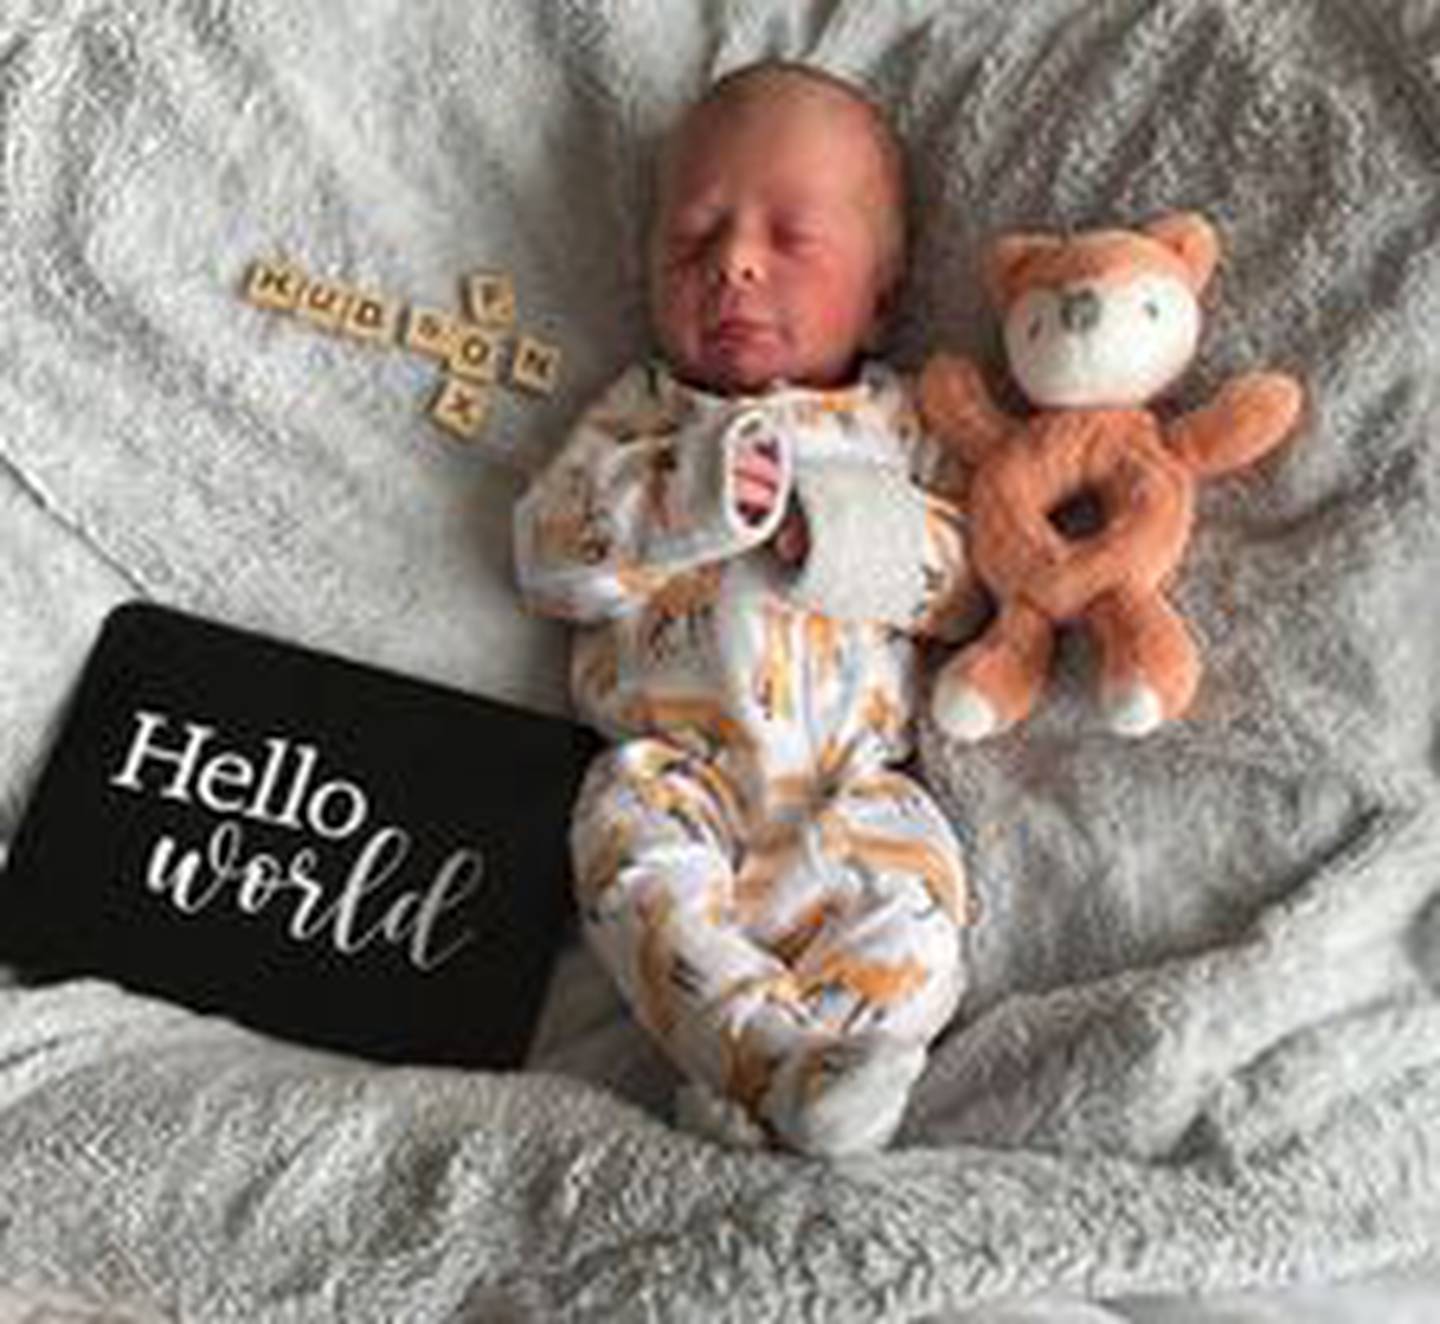 Hudson Fox Hayes arrived Friday morning on the car ride to Advocate Sherman Hospital. His middle name was changed because Hudson was born on Fox Lane, close to the hospital. By coincidence, parents Tim and Katie Hayes, already had a fox for Hudson.